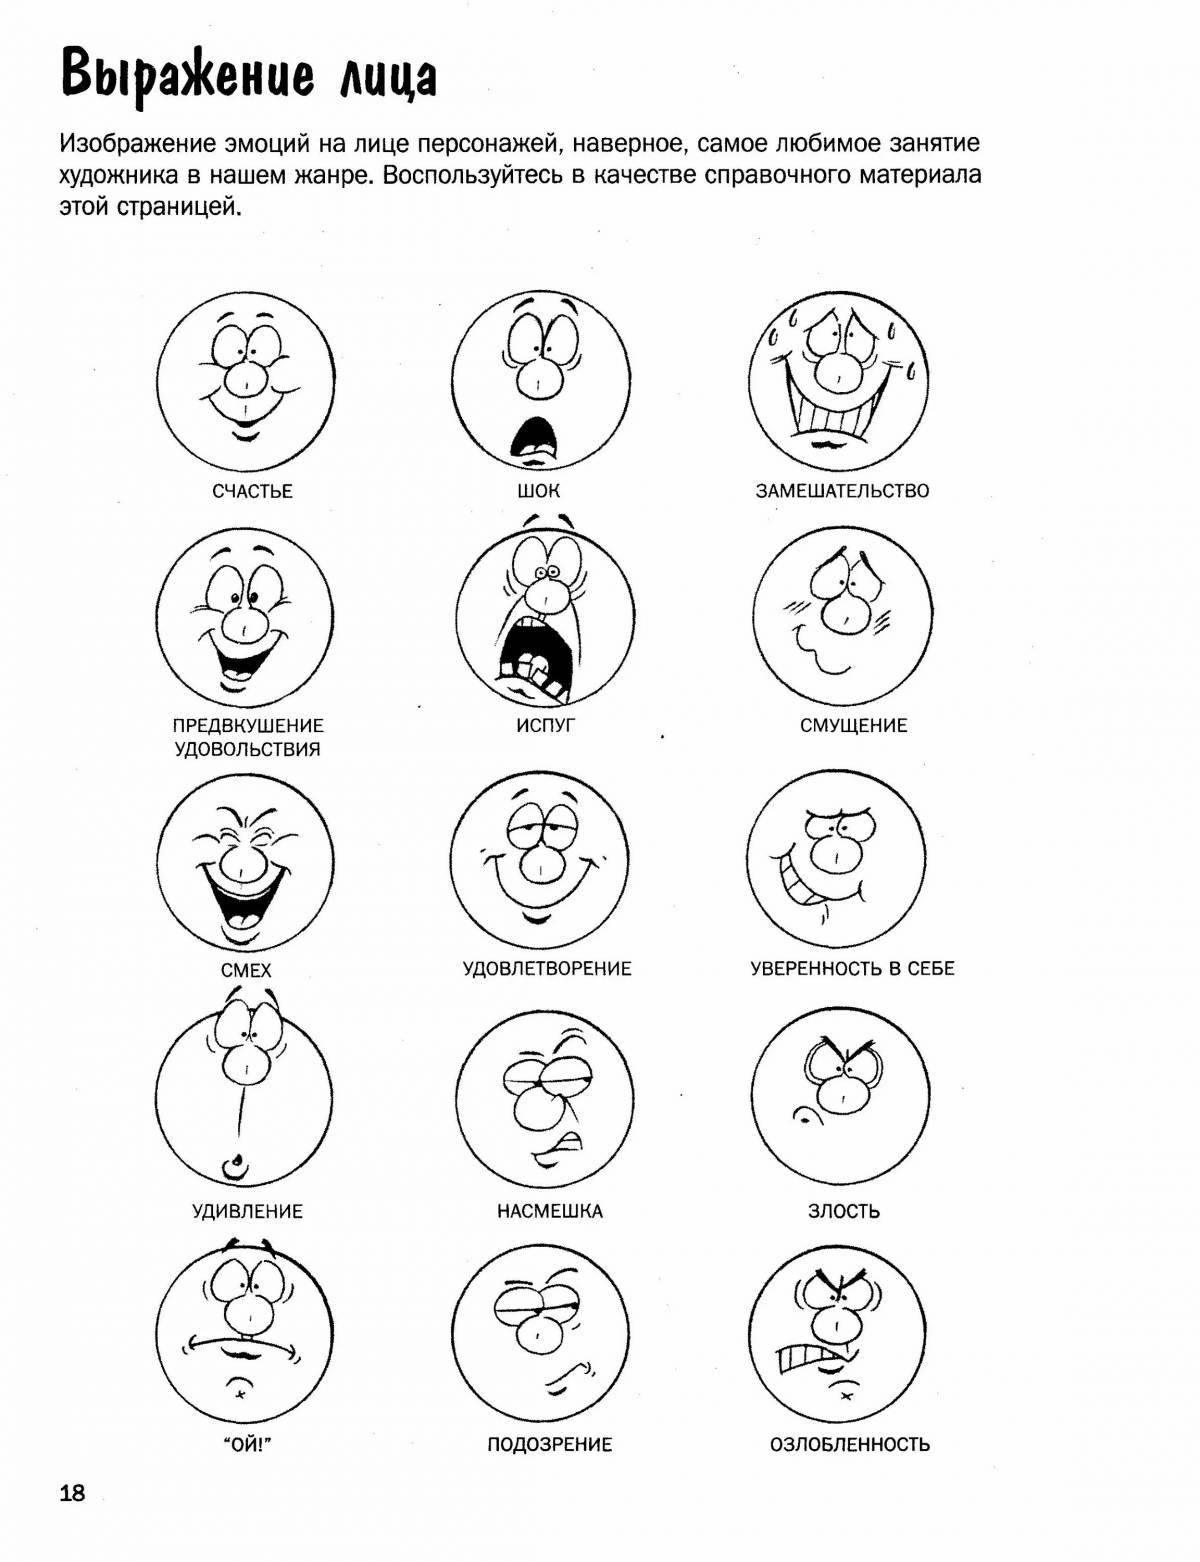 Curious coloring of human emotions